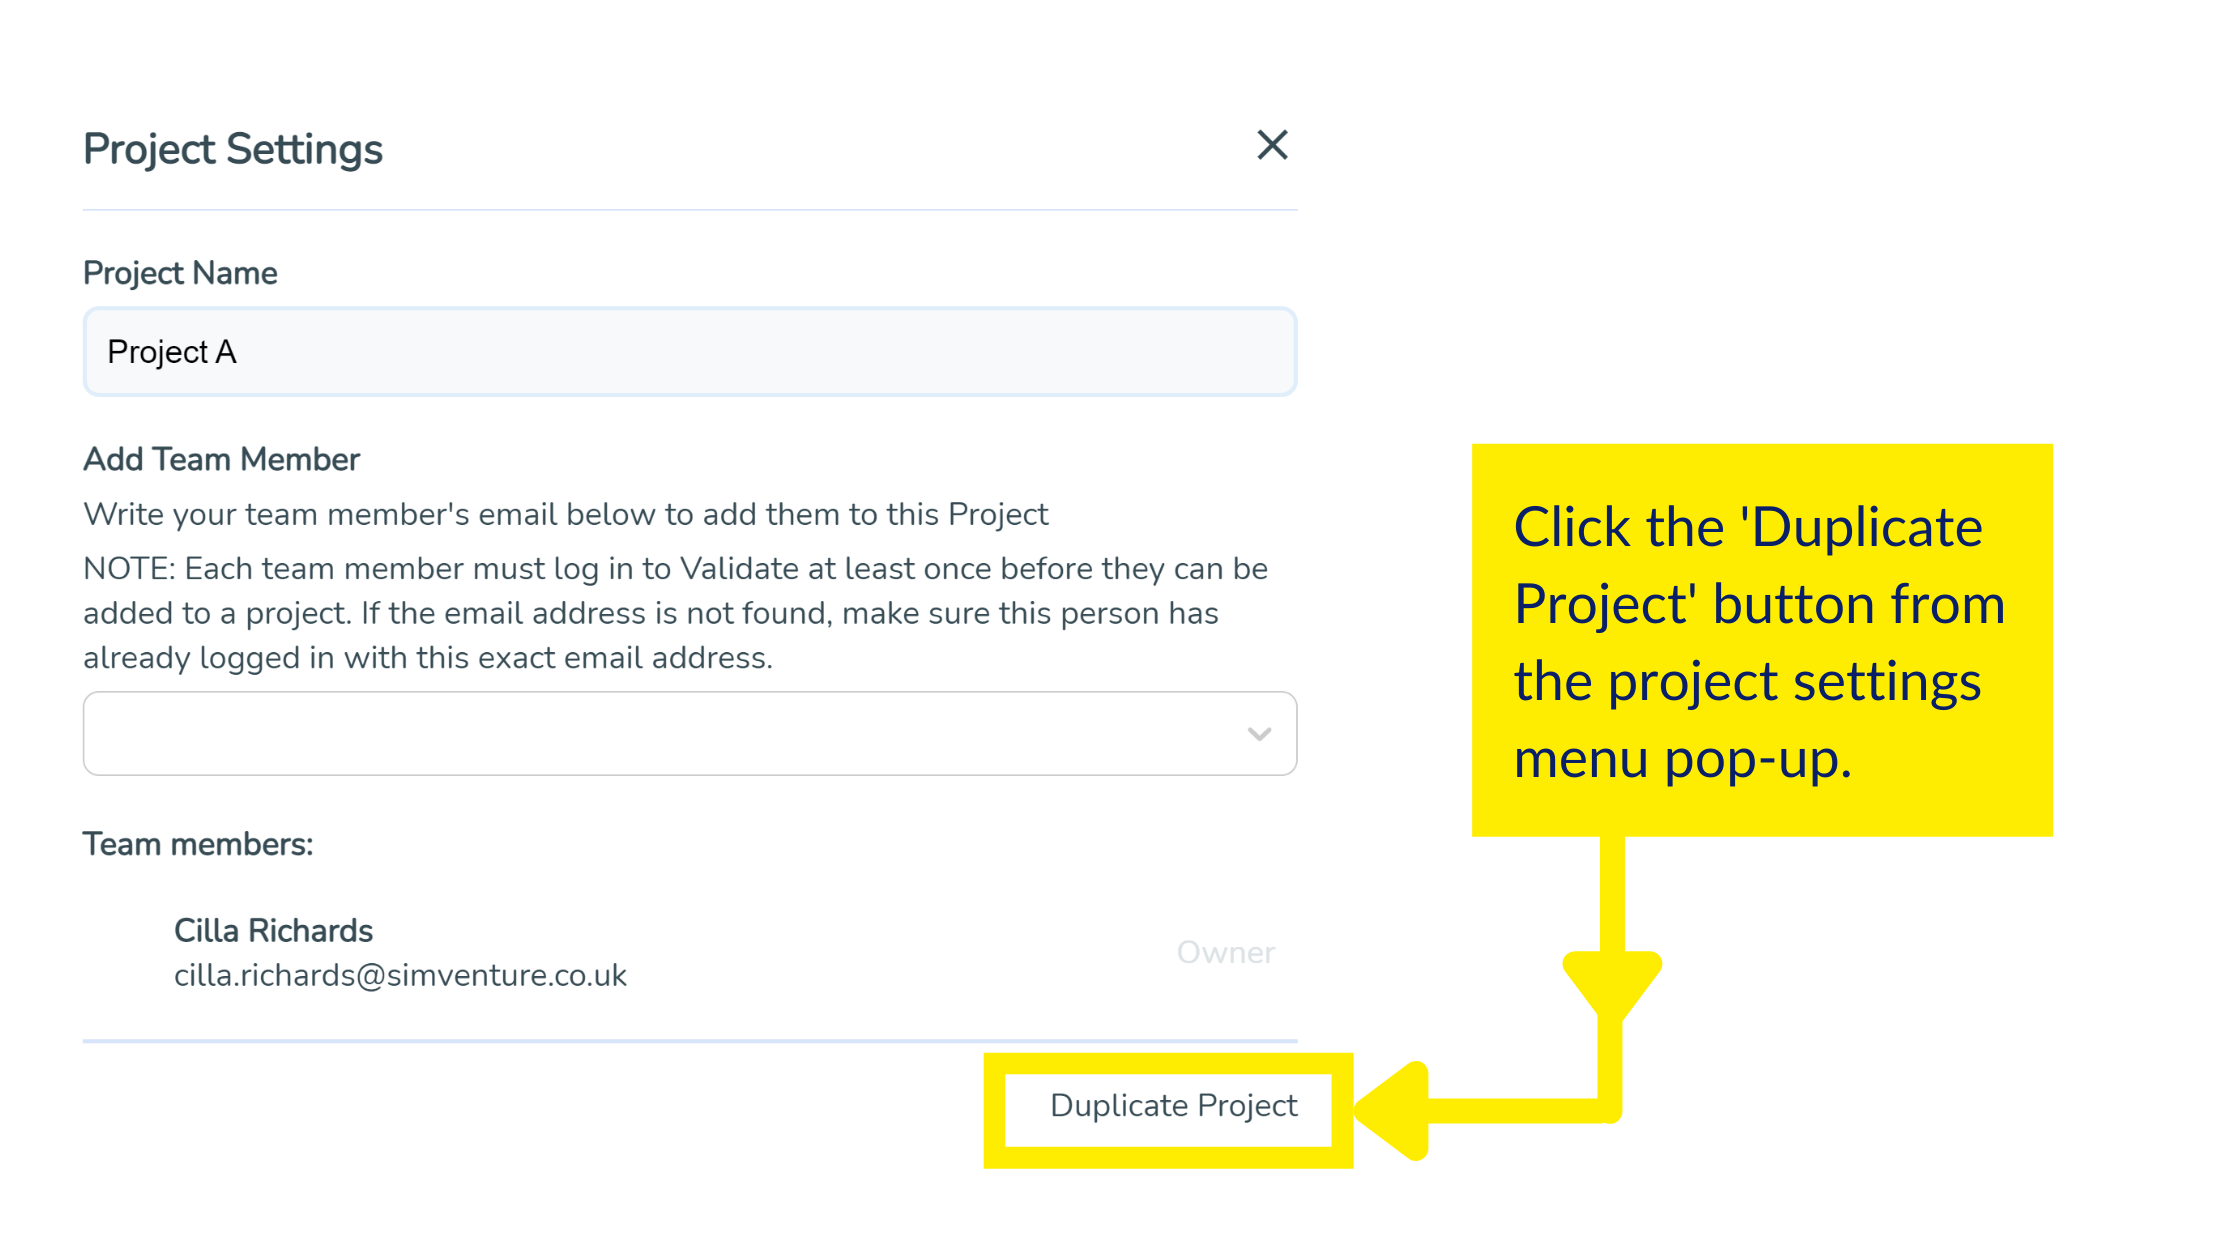 Latest updates: Click the duplicate project button in the project settings window to clone an existing project in SimVenture Validate